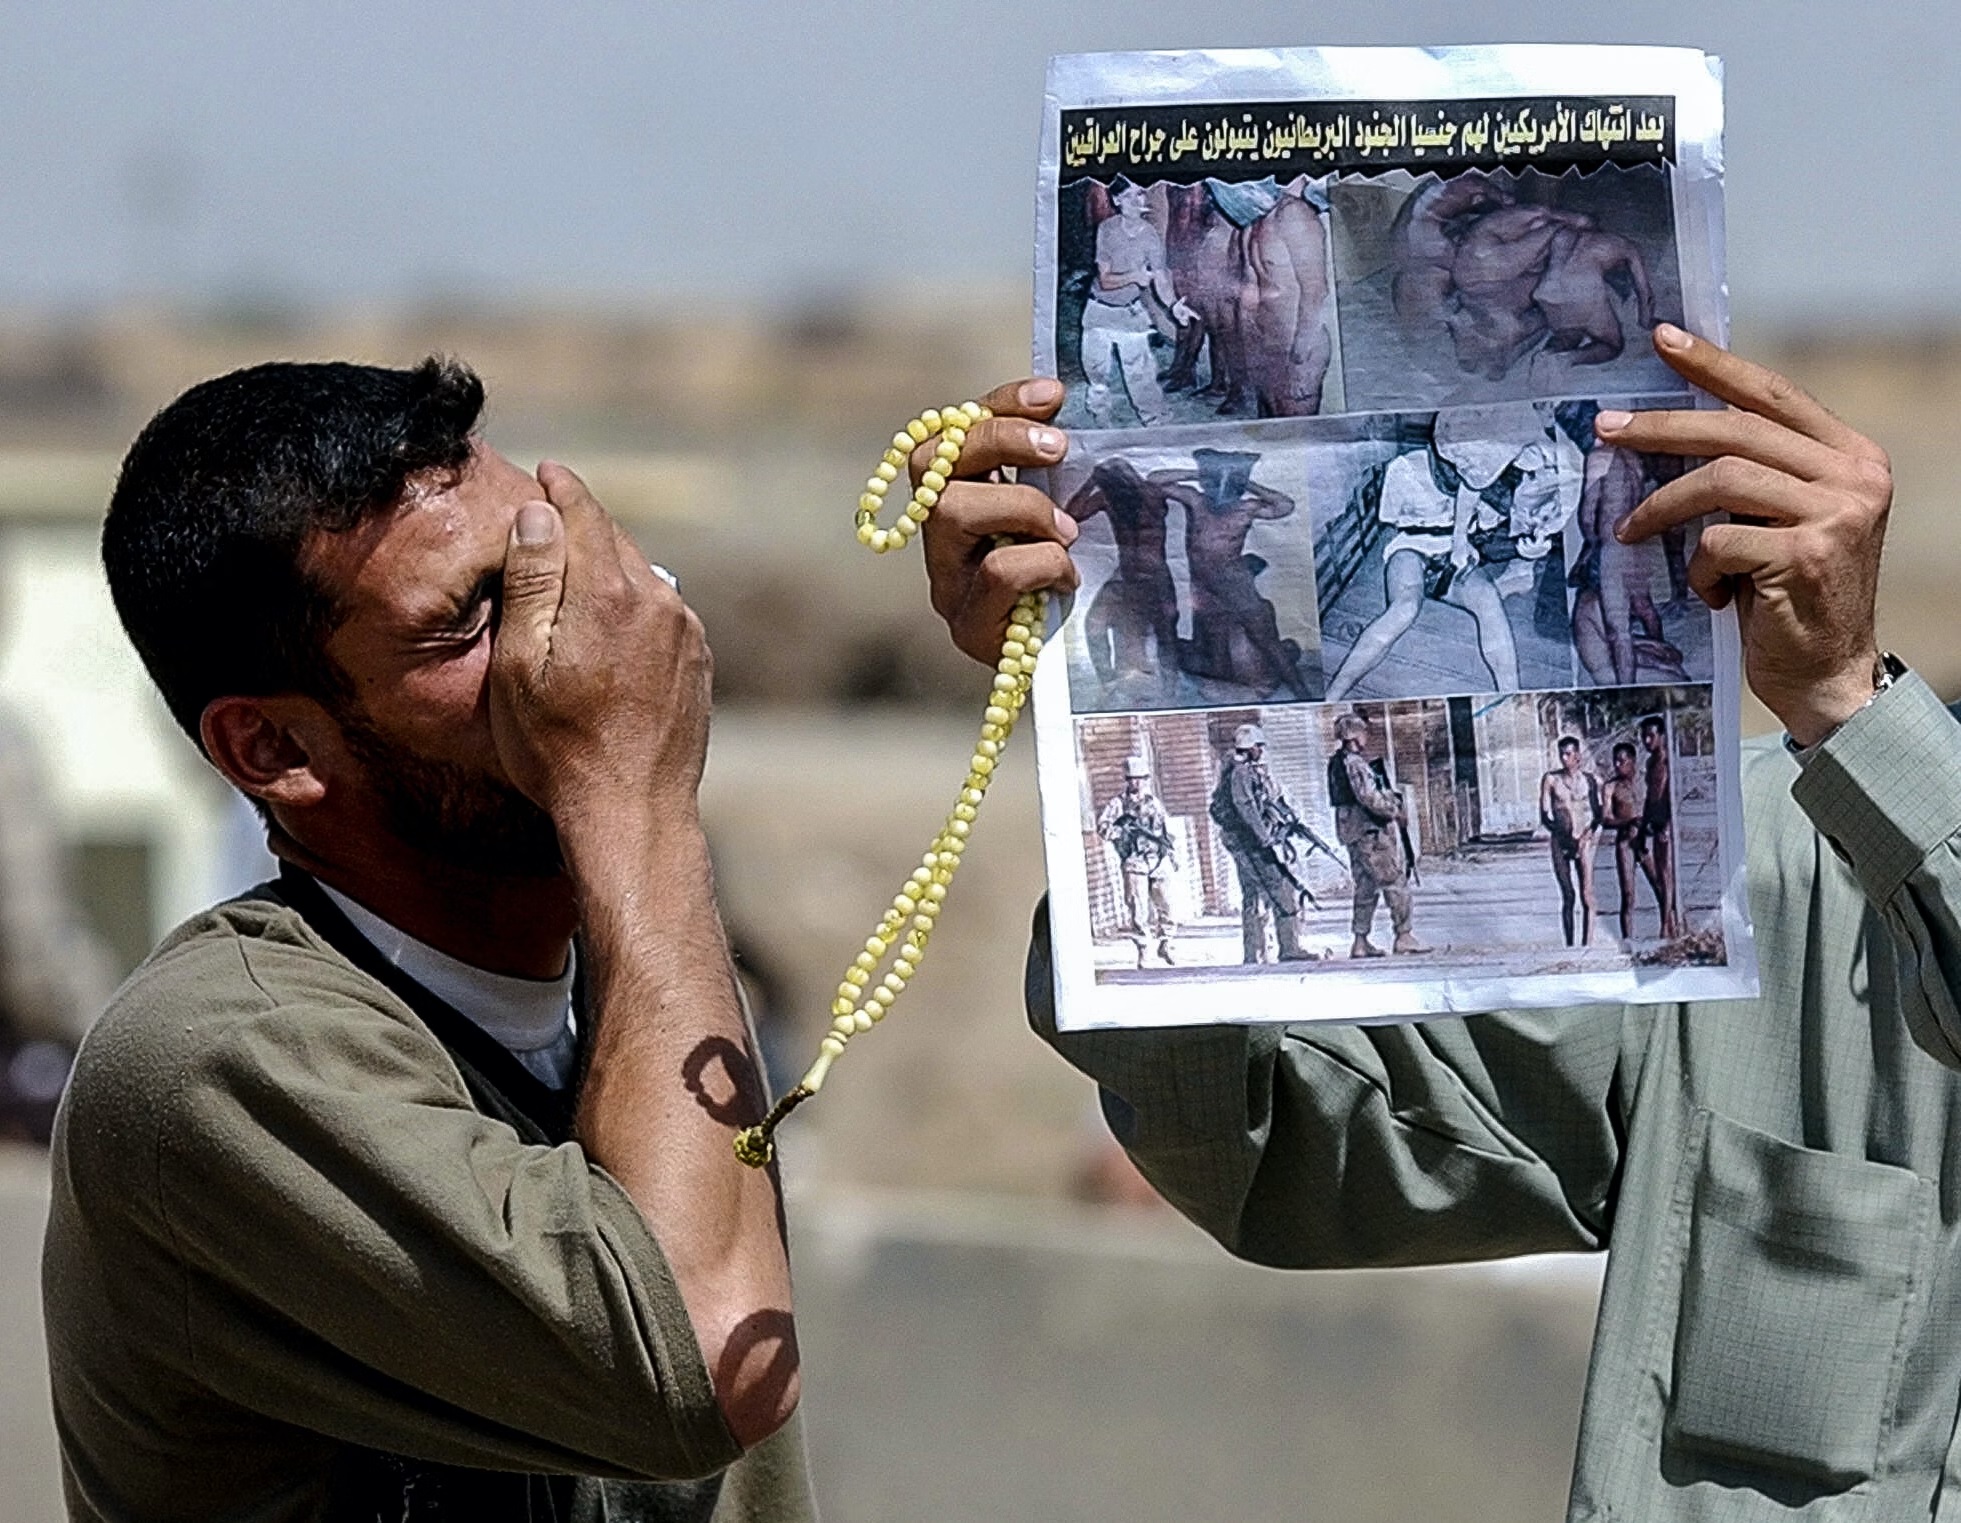 A relative of an Iraqi prisoner being held by US authorities at the Abu Ghraib prison holds his hand to his face 08 May 2004 as another one shows a newspaper featuring photos of US soldiers abusing Iraqi prisoners inside the detention center located 30 kms west of Baghdad.  Hundreds of Iraqis gather in front of the jail daily in the hope of getting news about their loved ones.    AFP PHOTO/Roberto SCHMIDT / AFP / ROBERTO SCHMIDT        (Photo credit should read ROBERTO SCHMIDT/AFP via Getty Images)